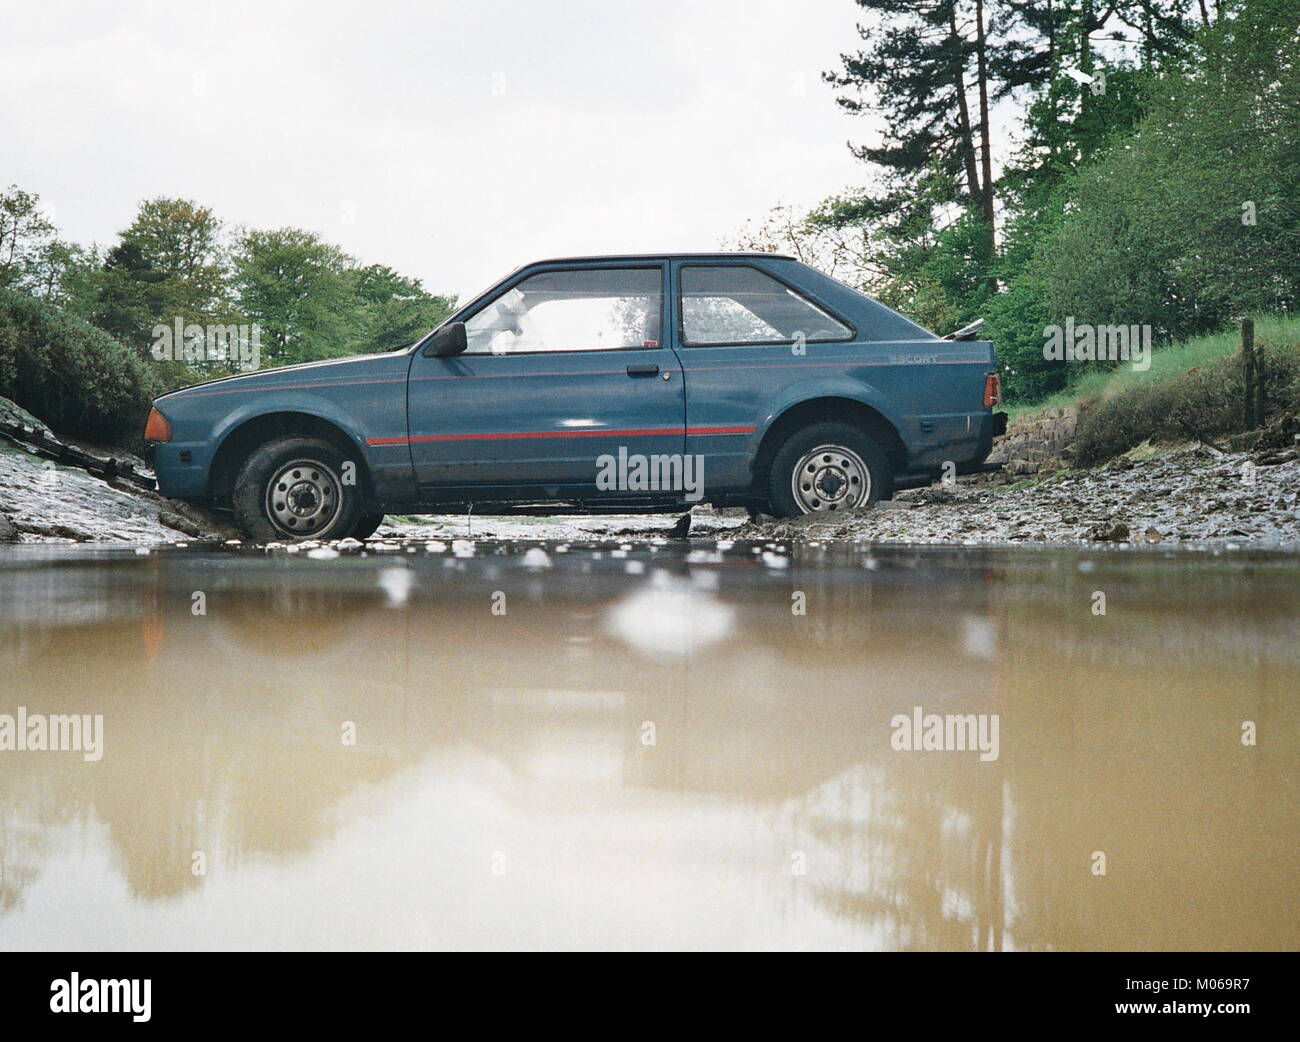 AJAXNETPHOTO. 1991.HAMBLE, ENGLAND. - UP THE CREEK. - A FORD ESCORT LIES IN A TIDAL RIVER CREEK AFTER COMING OFF THE ROAD.  PHOTO:JONATHAN EASTLAND/AJAX REF:TC6053 12 8 Stock Photo